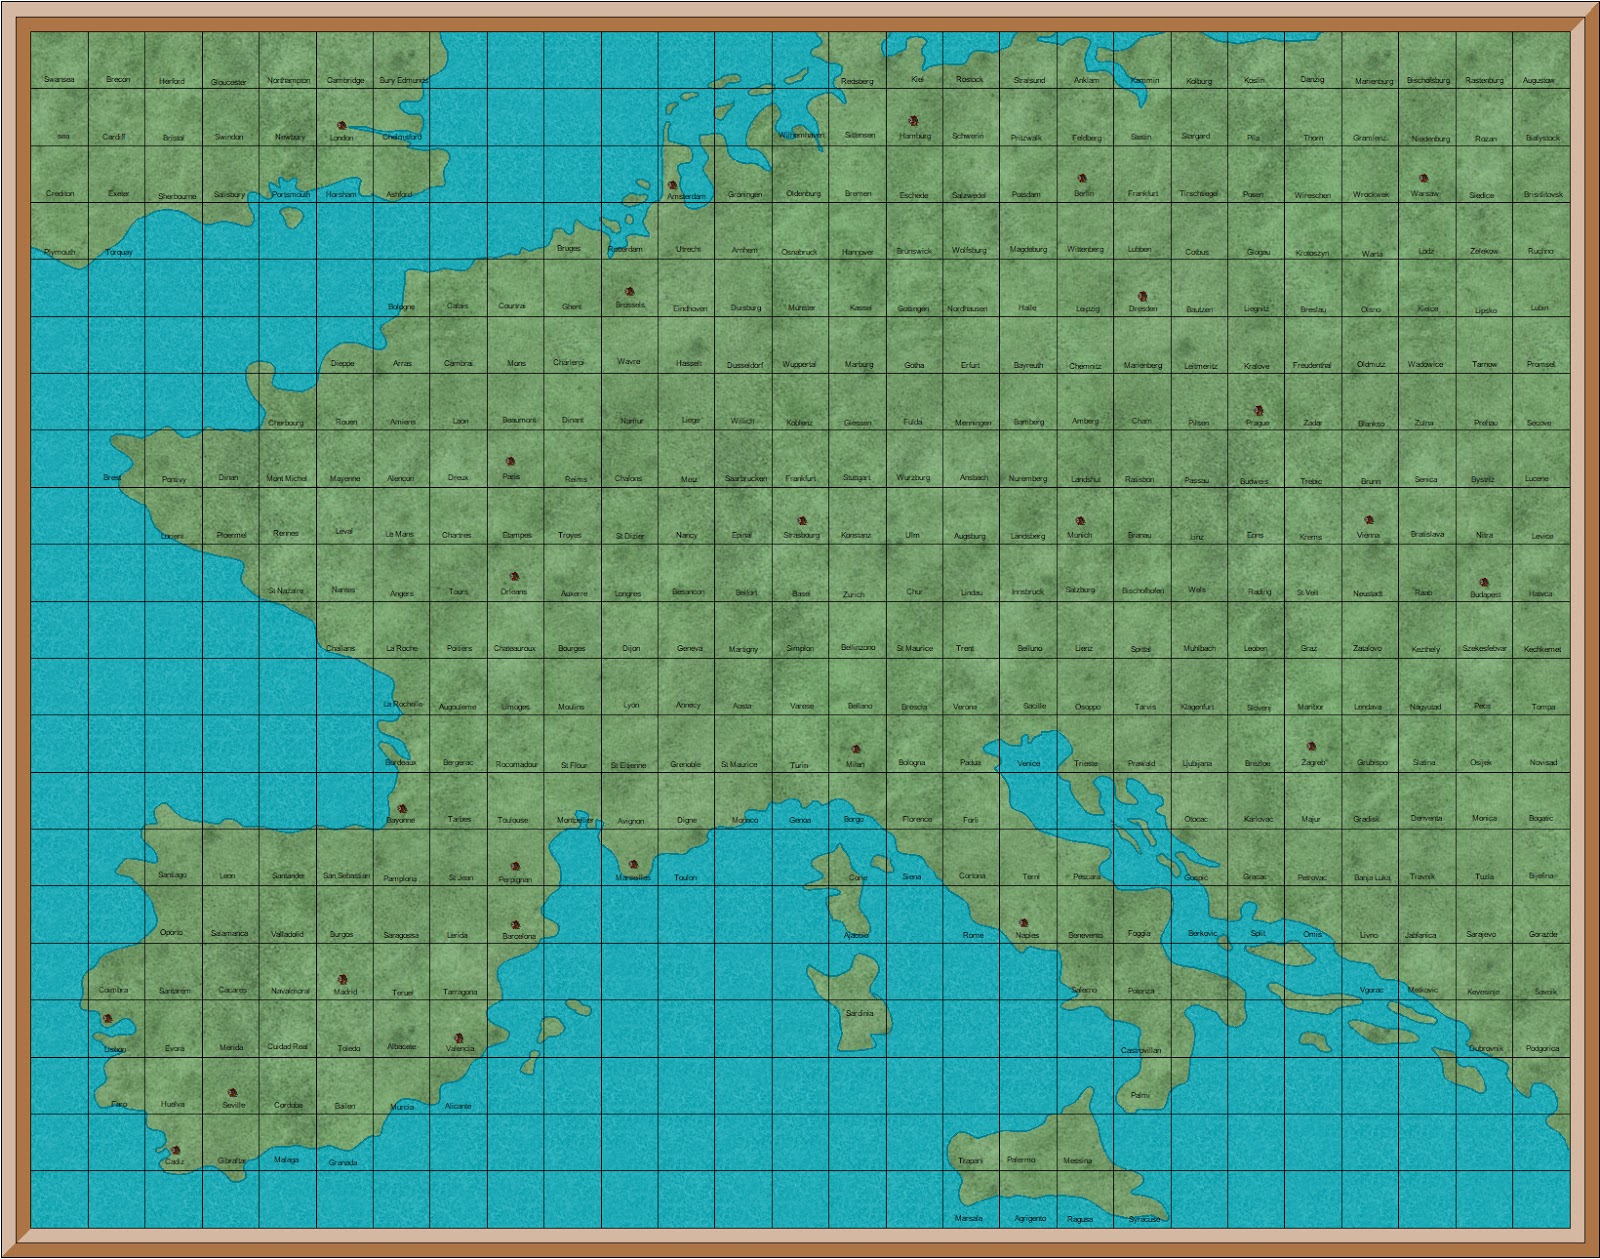 Napoleonic Wargaming New Campaign Map Of Spain